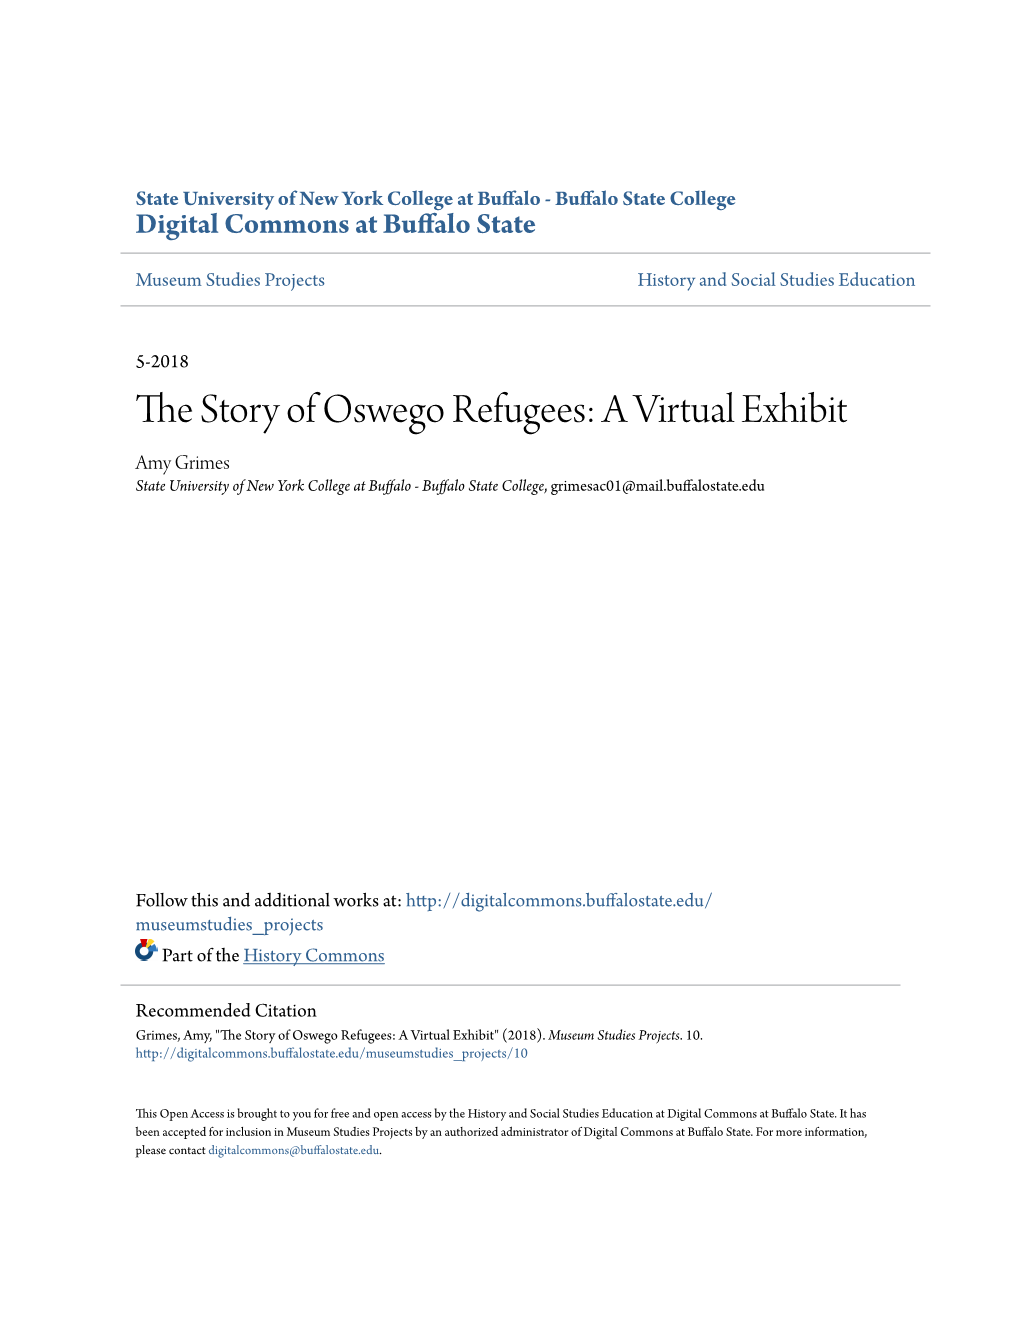 The Story of Oswego Refugees: a Virtual Exhibit